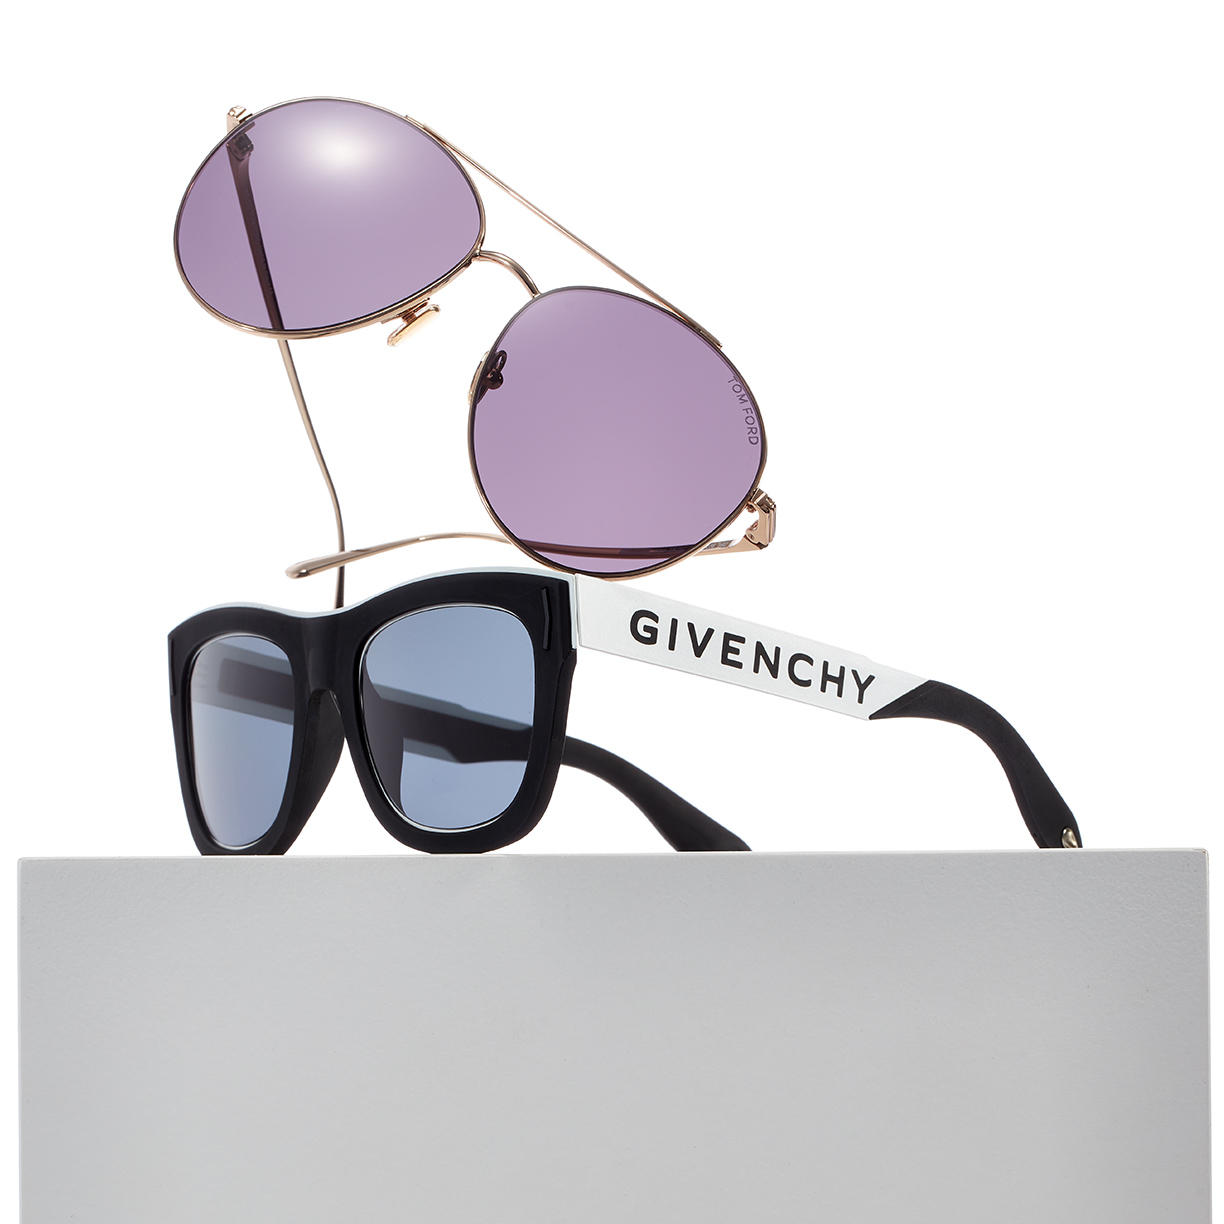 Designer Sunglasses Feat. Givenchy Up to 65% Off